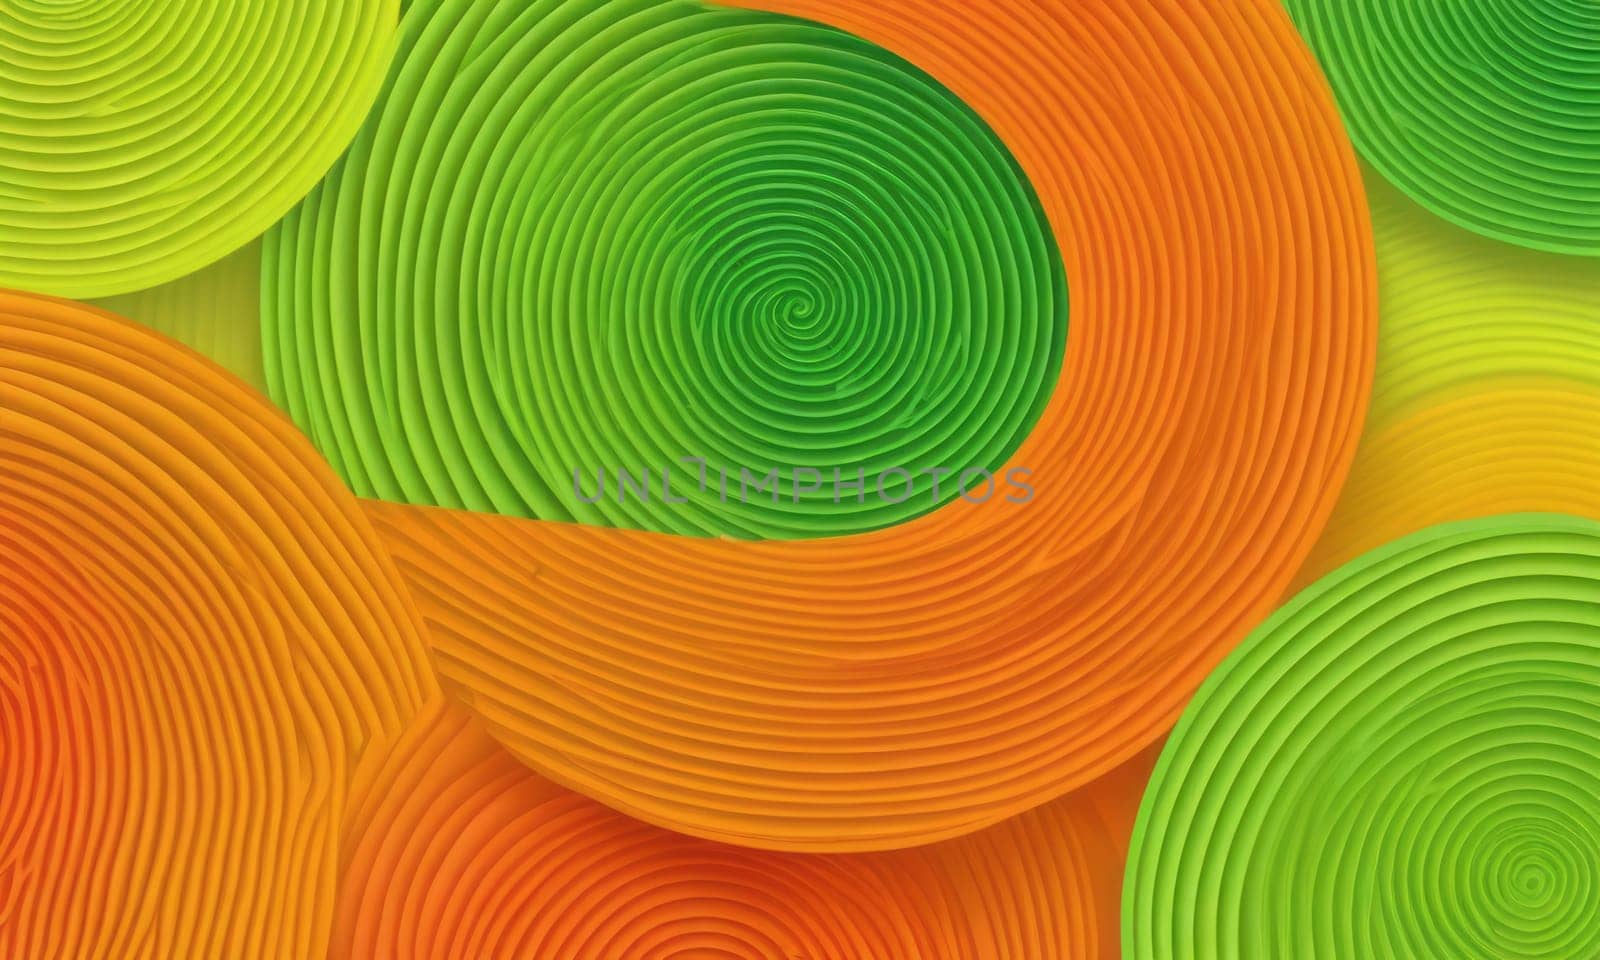 Coiled Shapes in Lime Orange by nkotlyar